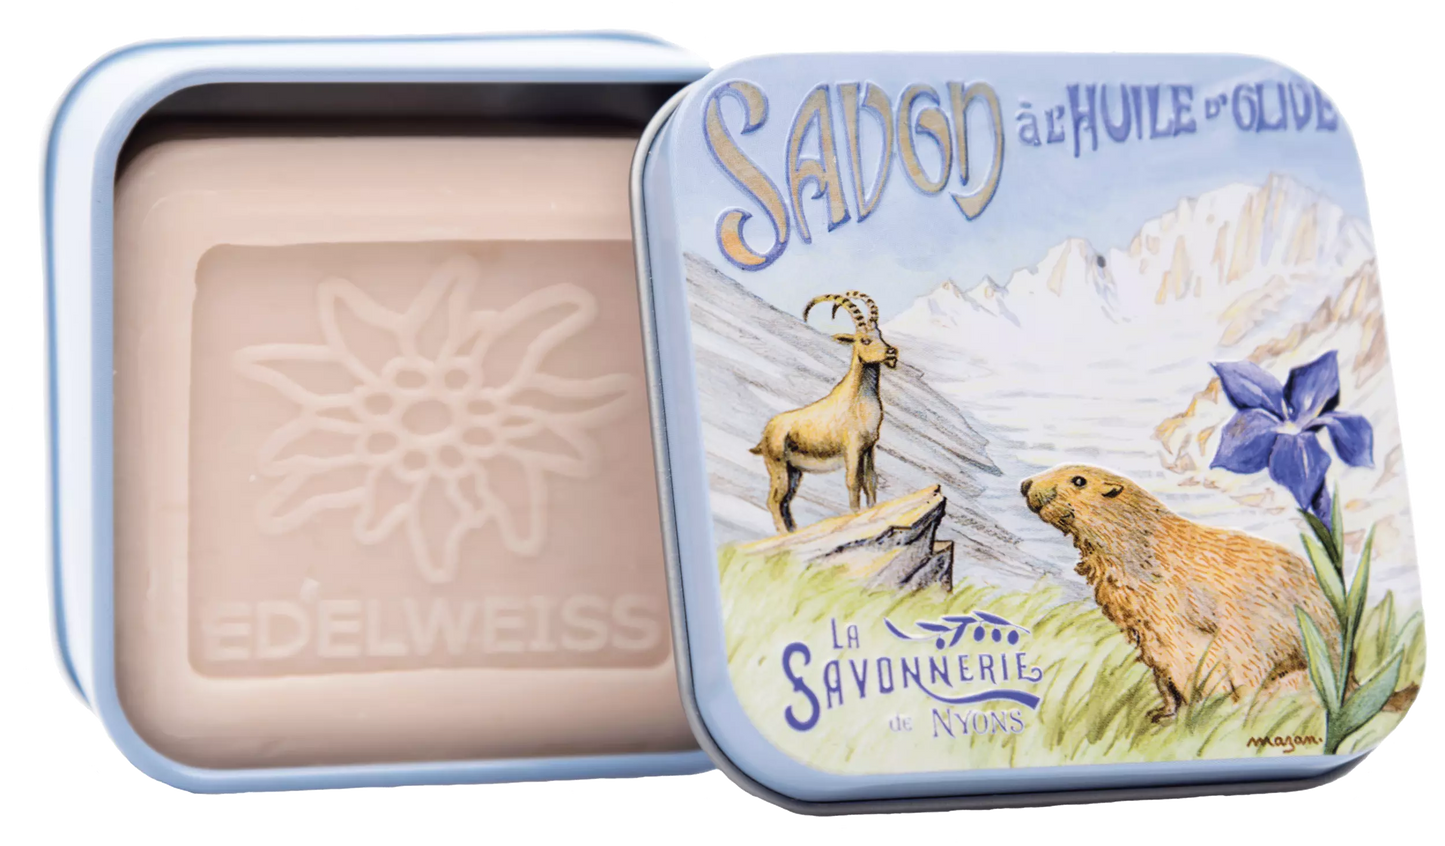 Soap 100g in a tin box "L'ALPAGE Marmotte" - Edelweiss